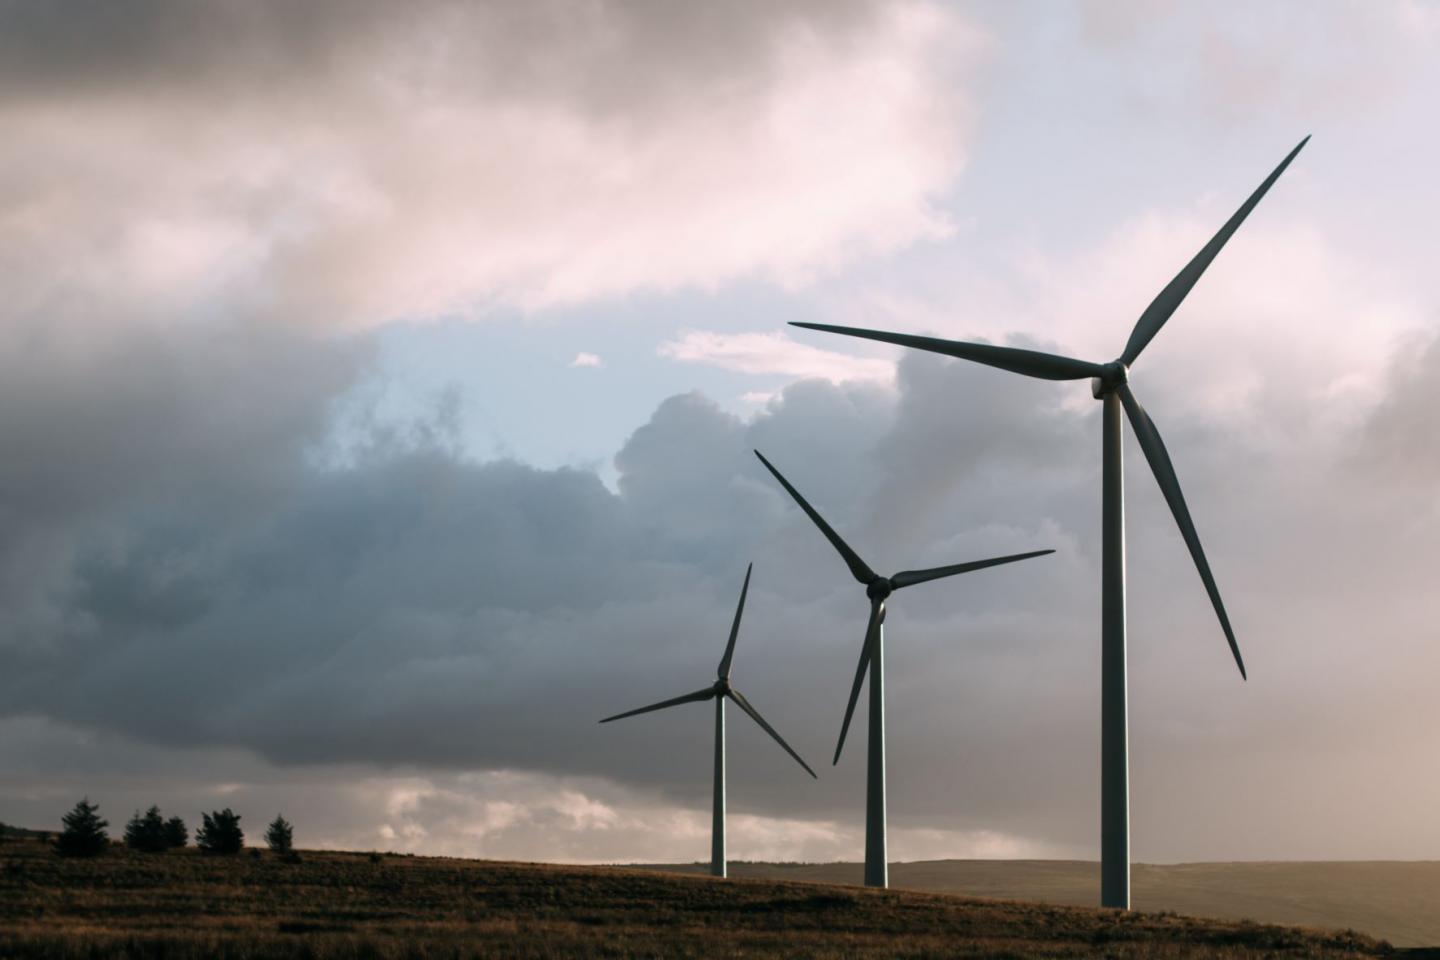 SENS4ICE discussed technology transfer with non-aviation applications like wind energy.  Image credit: Pexels.